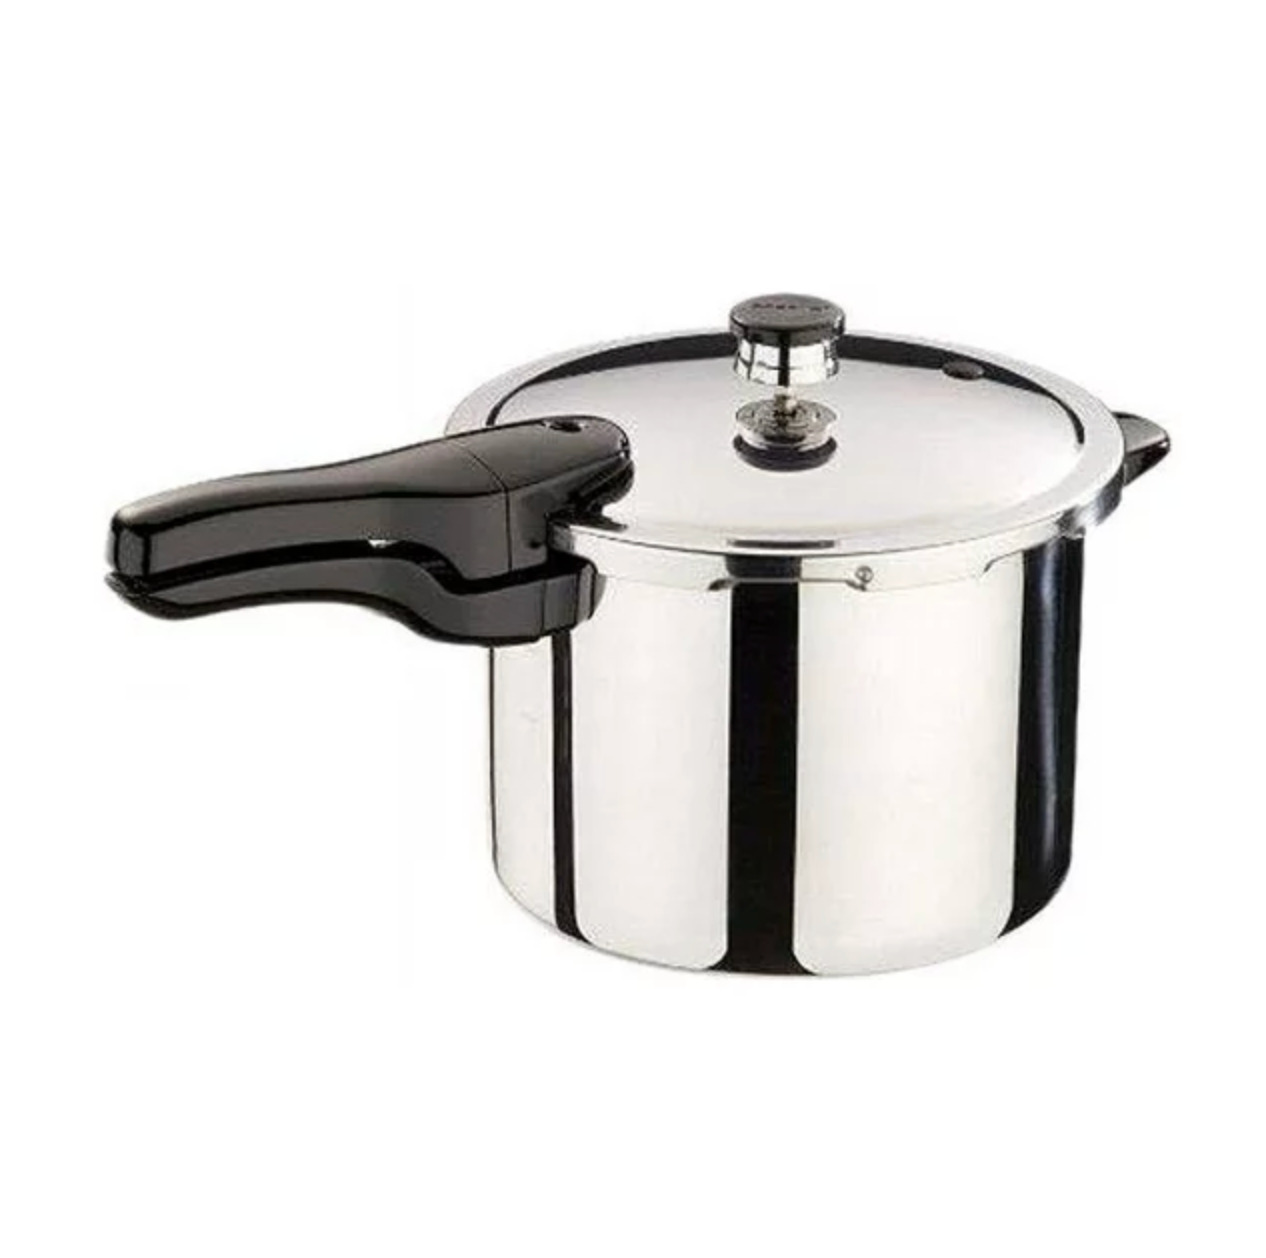 Presto 01362 Polished Stainless Steel Pressure Cooker 6 qt